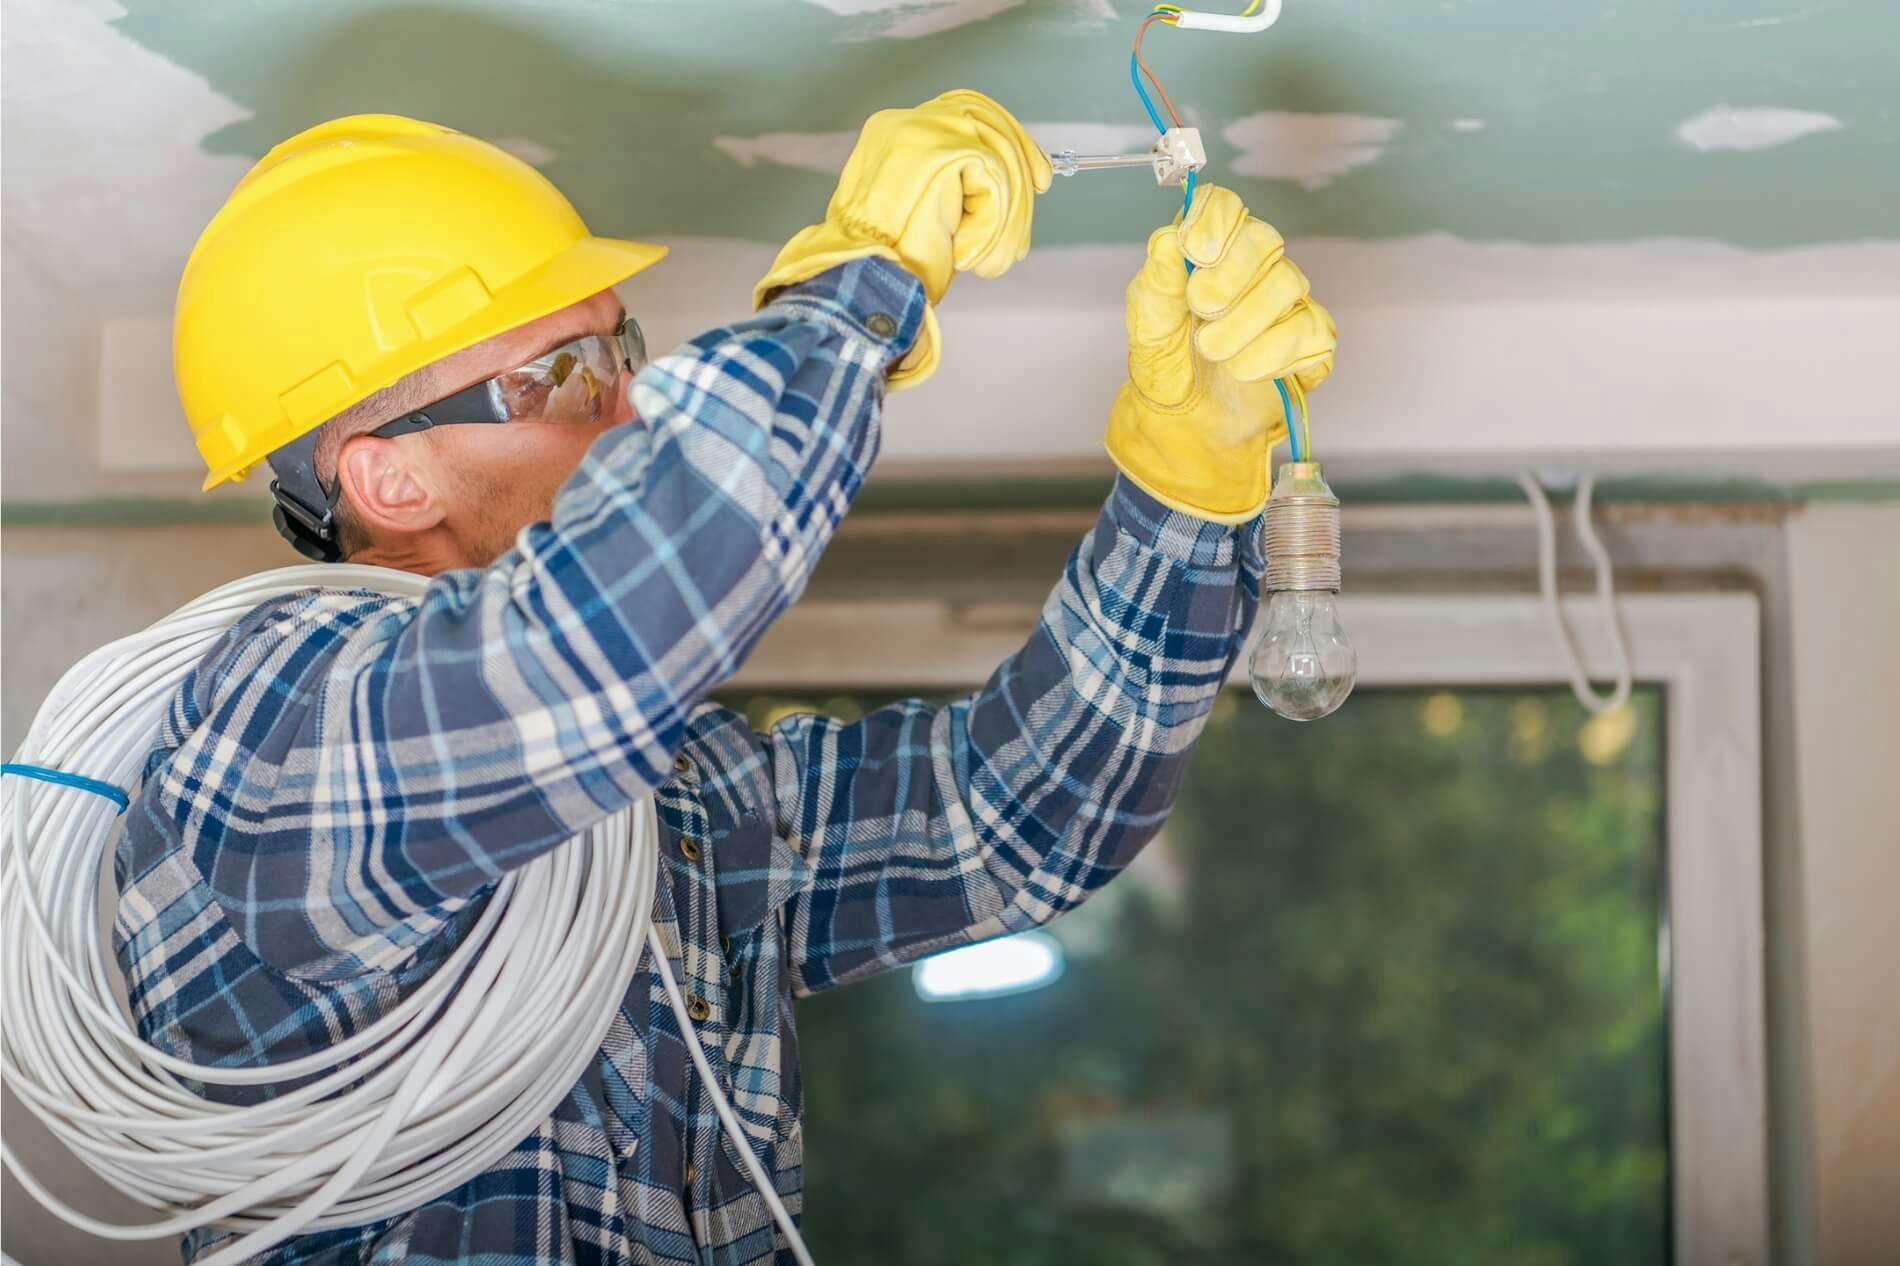 Electrician secures wires into incandescent light bulb